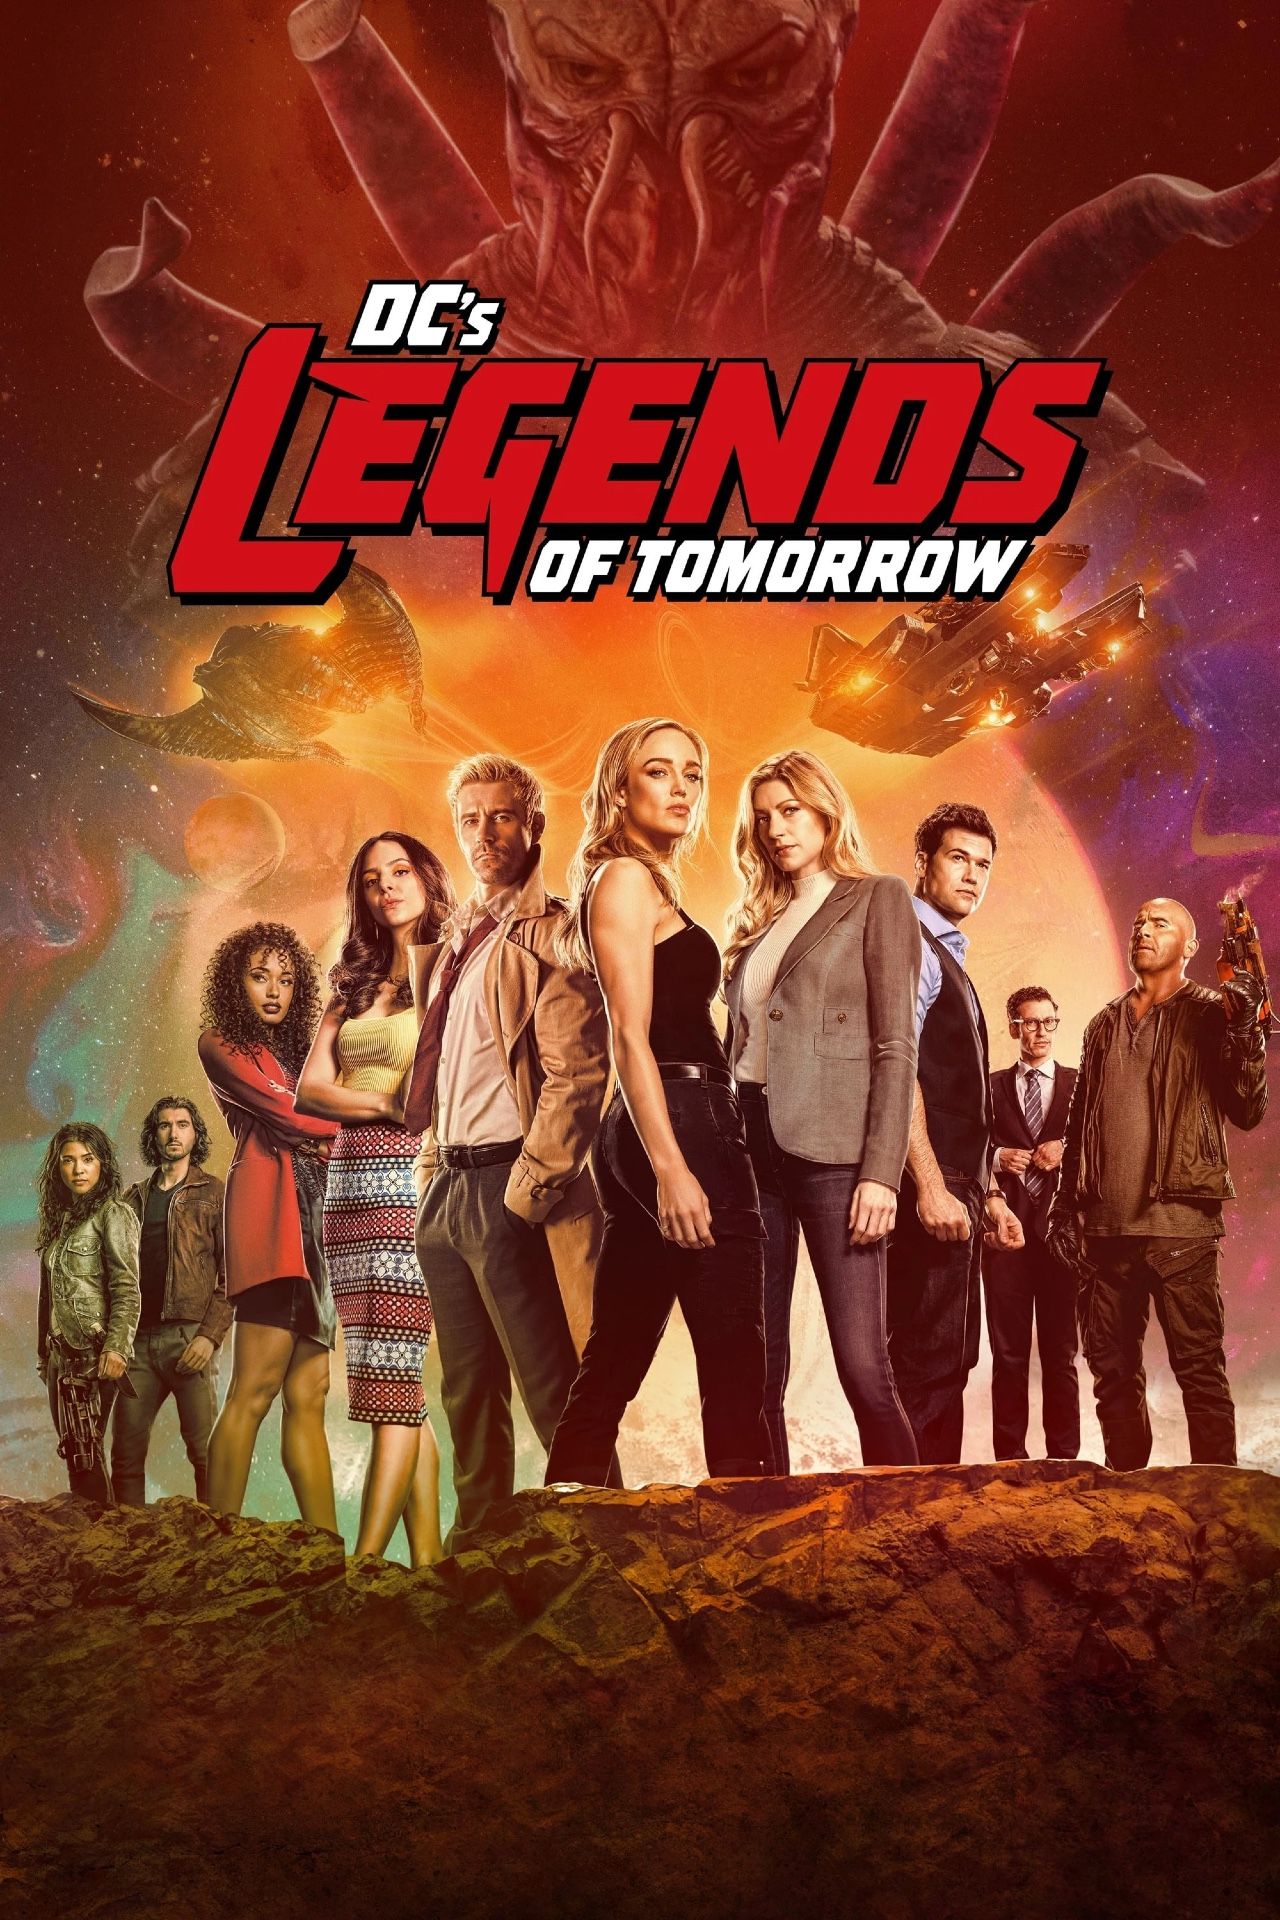 DC_Legends_of_tomorrow_Poster